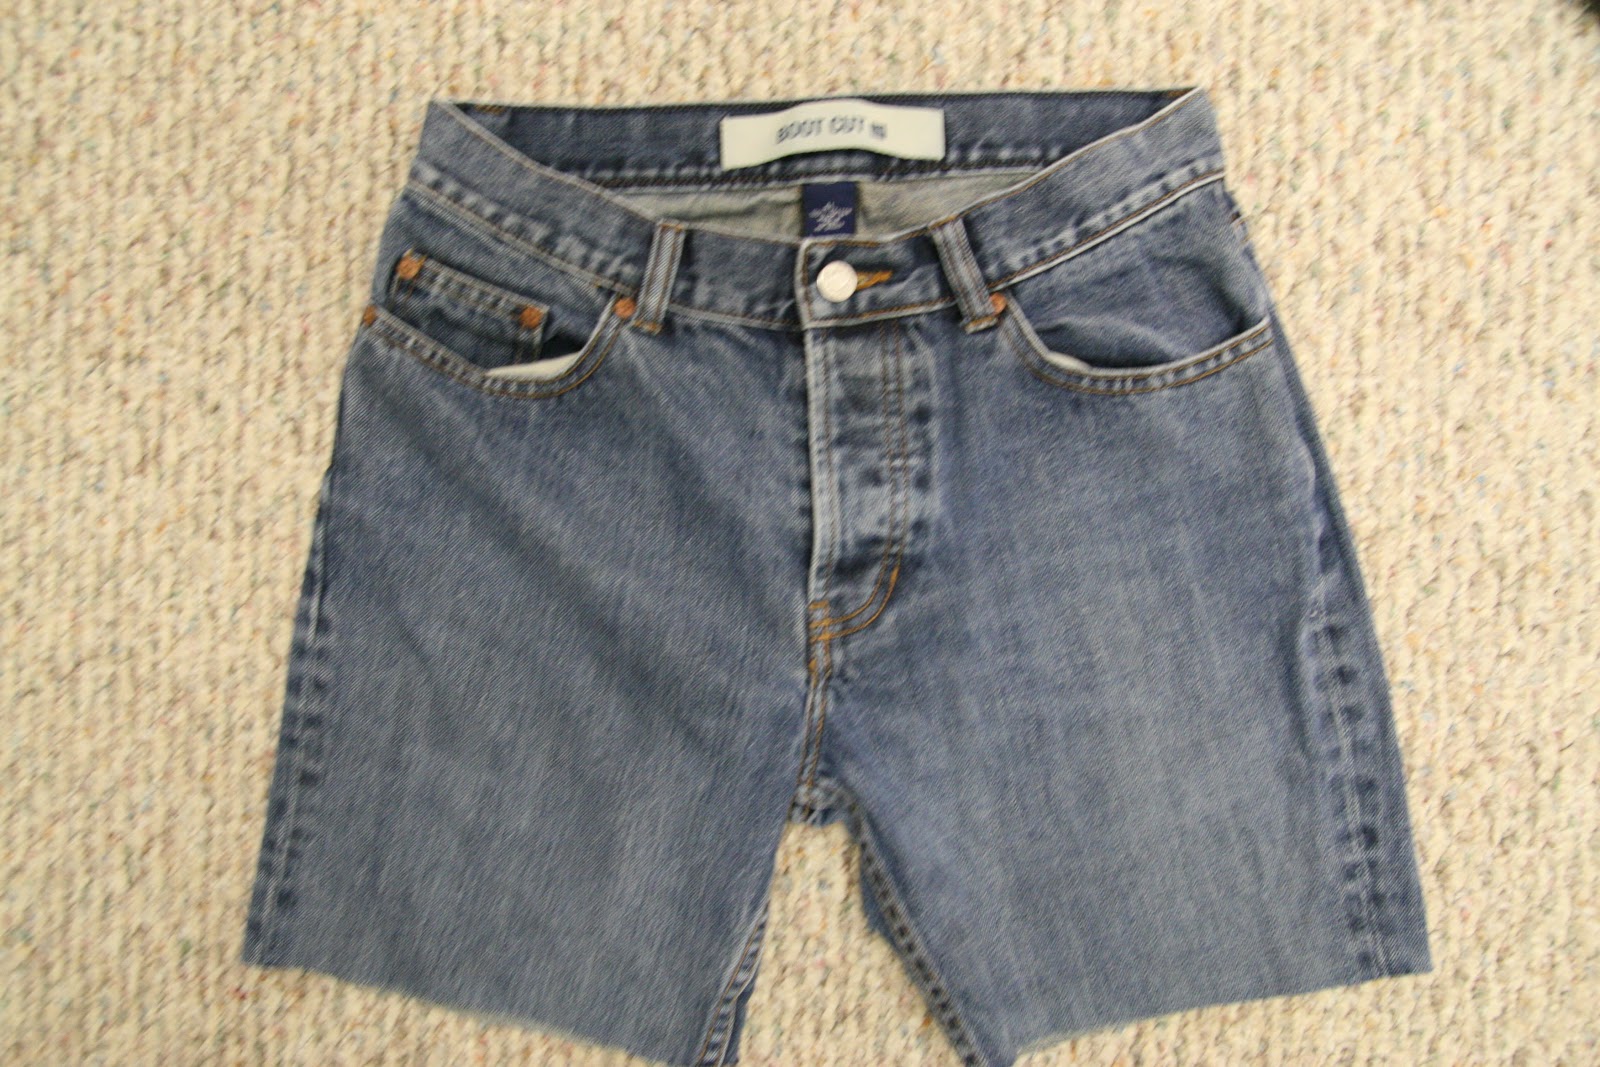 Jorts: What Exactly Are They and How Do They Appear? – Telegraph